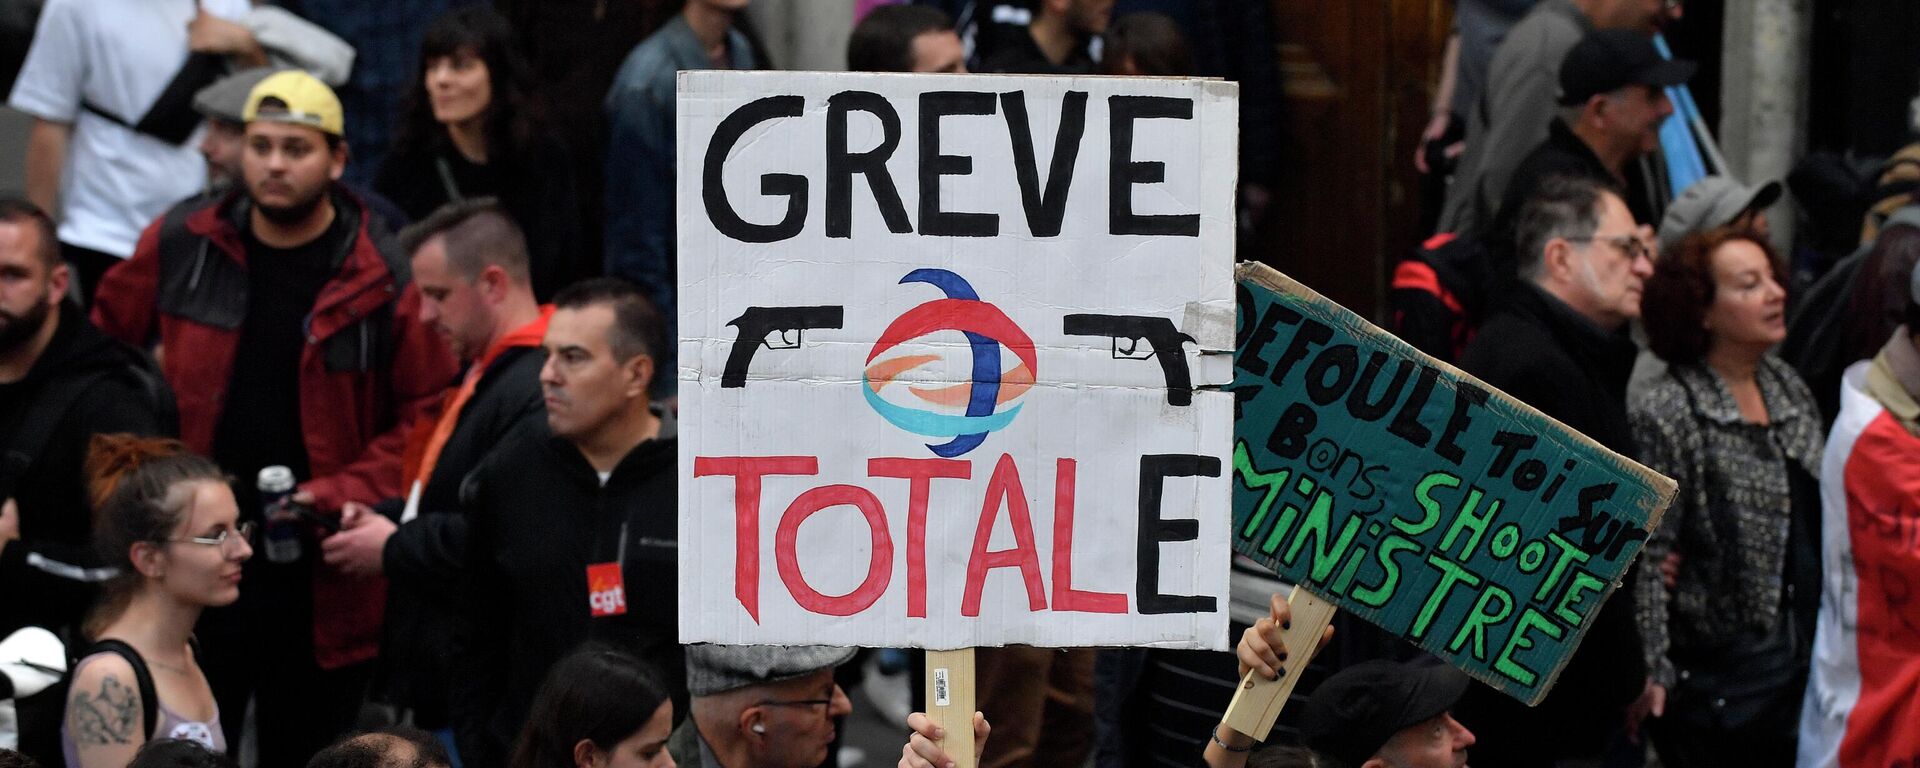 A protester holds a placard reading 'Total strike' -a play on the French energy giant TotalEnergies-  during a rally against soaring living costs and climate inaction called by French left-wing coalition NUPES (New People's Ecologic and Social Union) in Paris on October 16, 2022. - Sputnik International, 1920, 17.10.2022